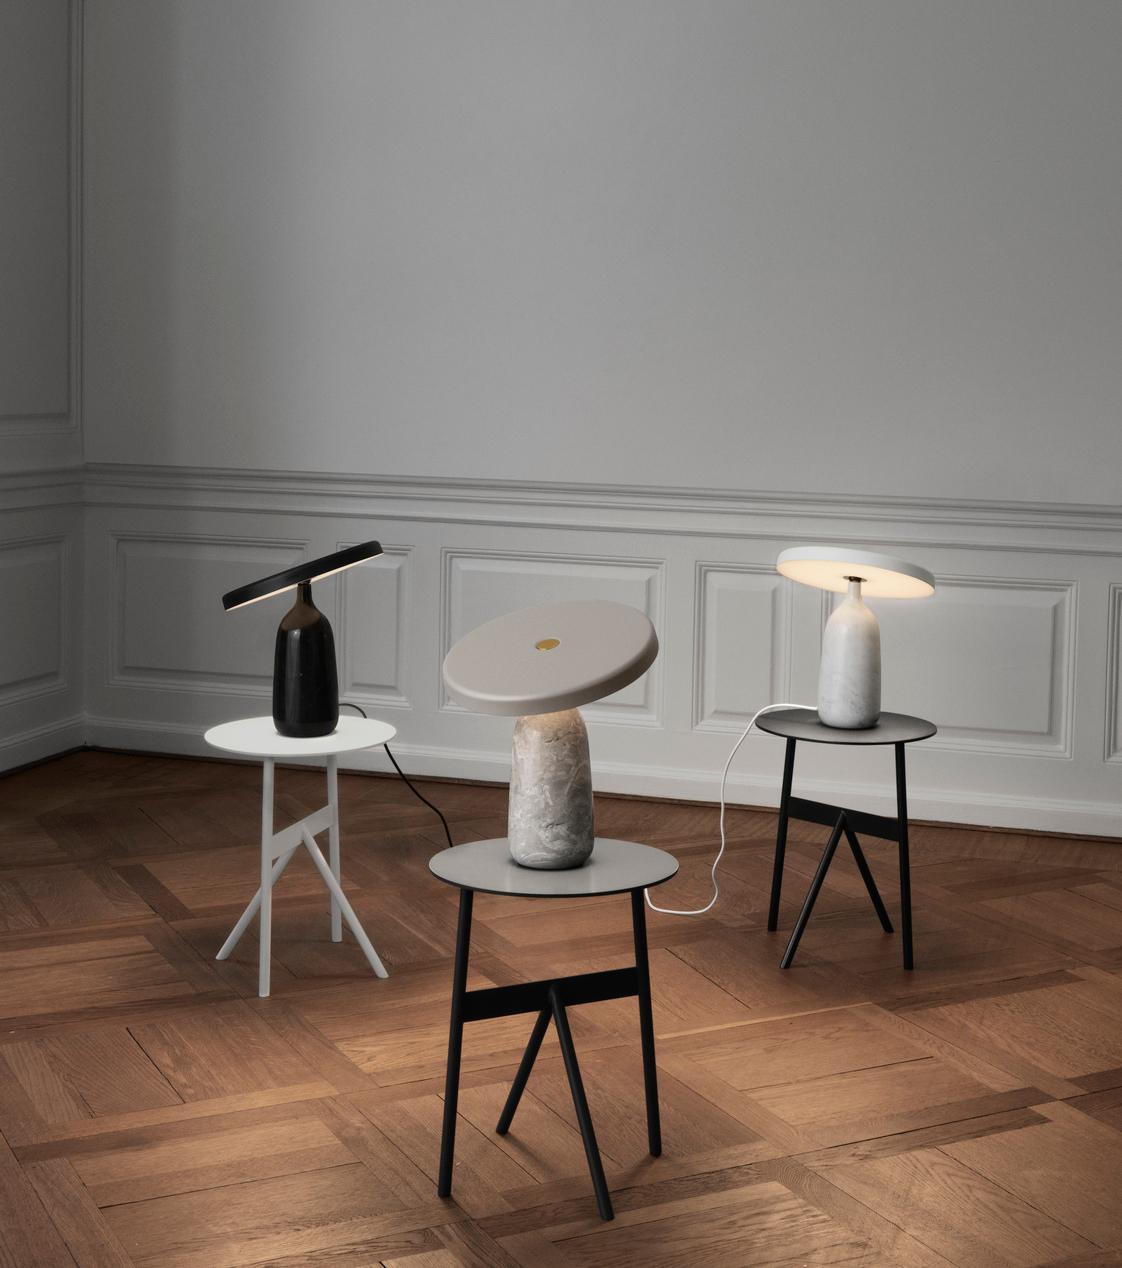 The table lamp consists of a steel screen with integrated LED light source and a lamp base made of hand turned Italian marble. Lampshade and base meet in a rotation point: a brass ball, which the shade can be tipped around to control the direction